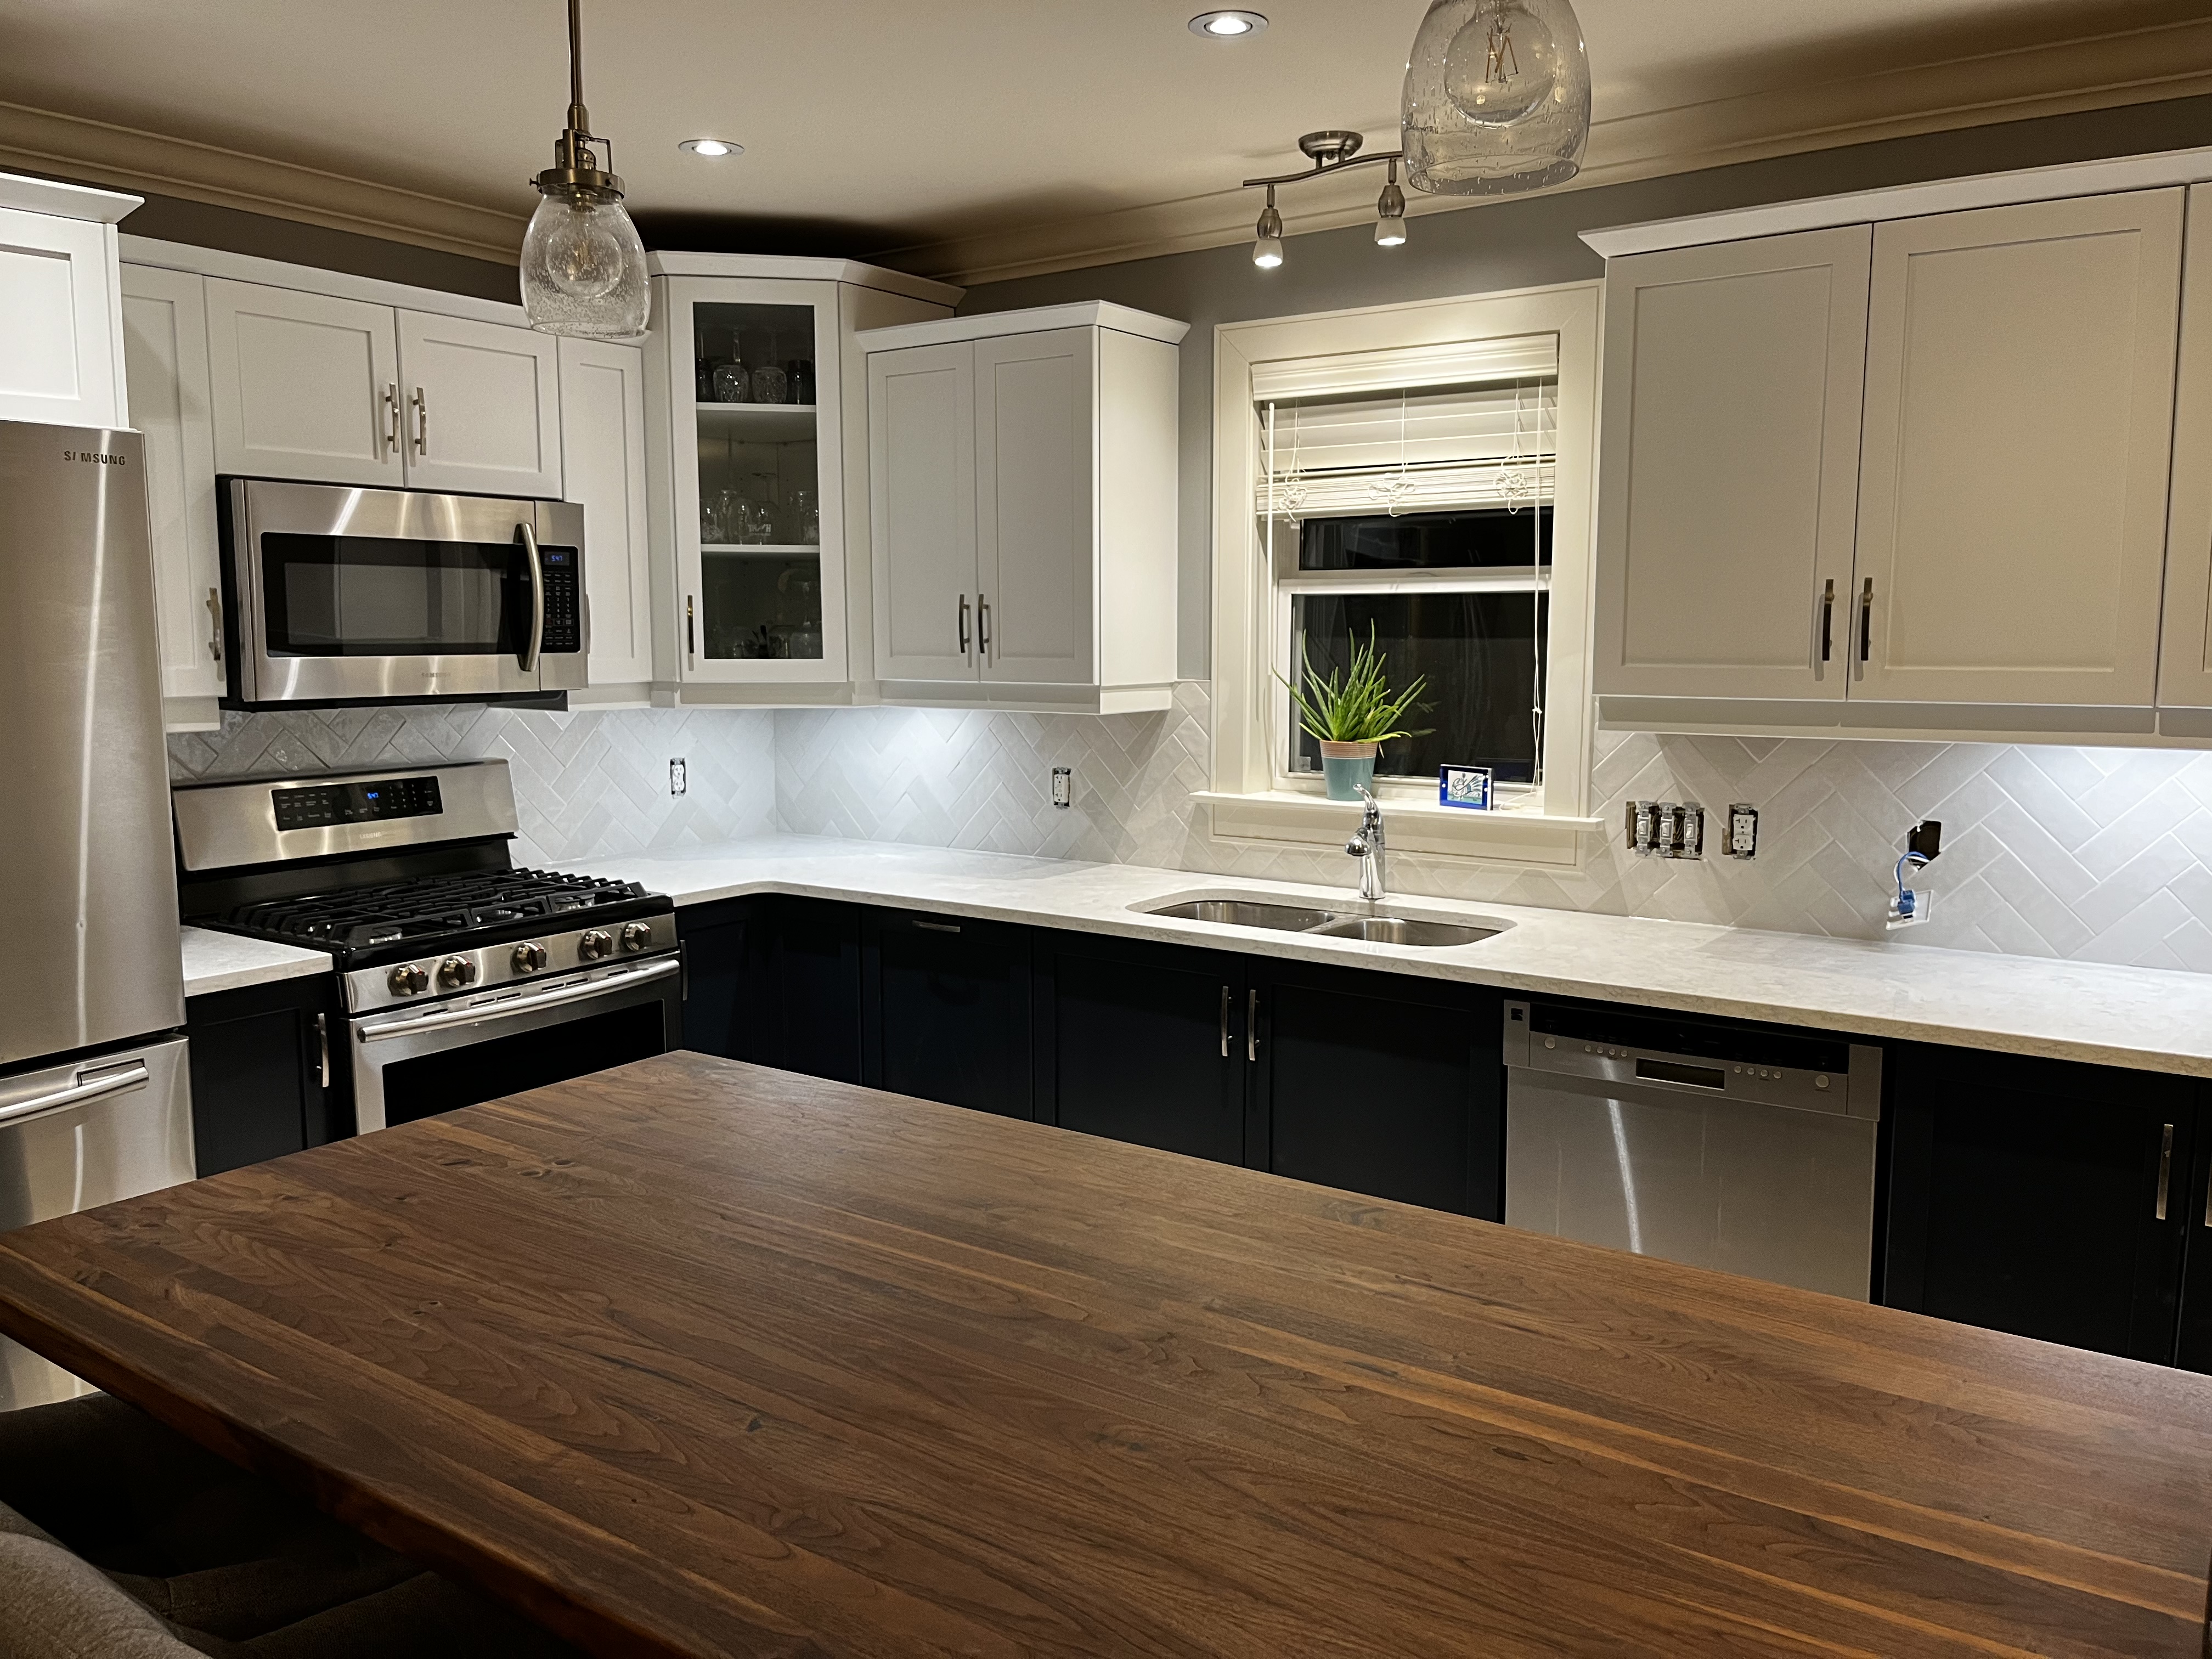 Who says you can’t have it all?  Quartz countertop, Butcher Block island, black lower cabinets, white upper cabinets, and a herringbone tile backsplash